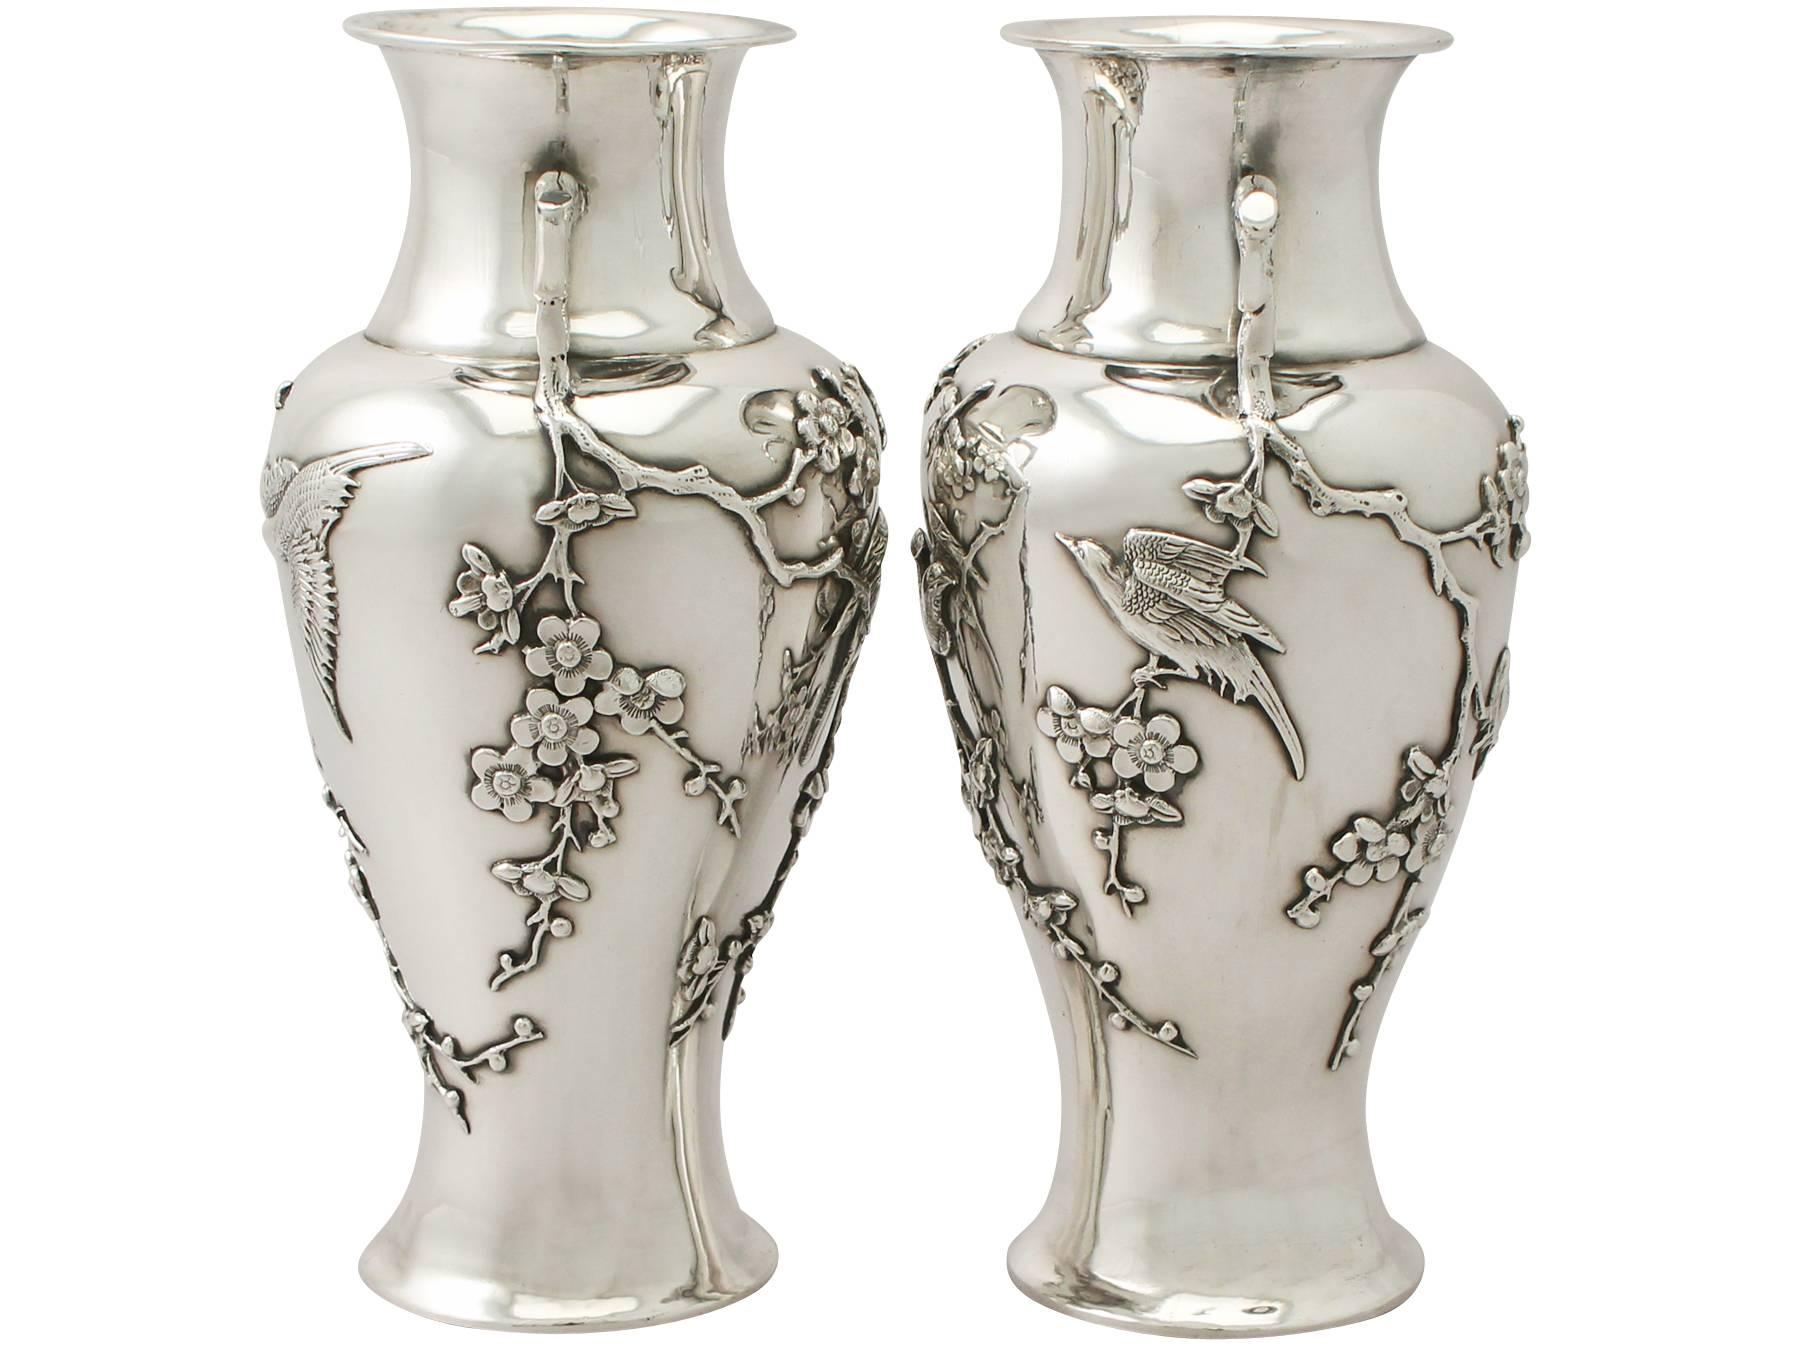 A fine and impressive pair of antique Chinese Export silver vases; an addition to our ornamental silverware collection.

These impressive antique Chinese Export silver vases have a circular rounded, waisted form.

The surface of each vase is